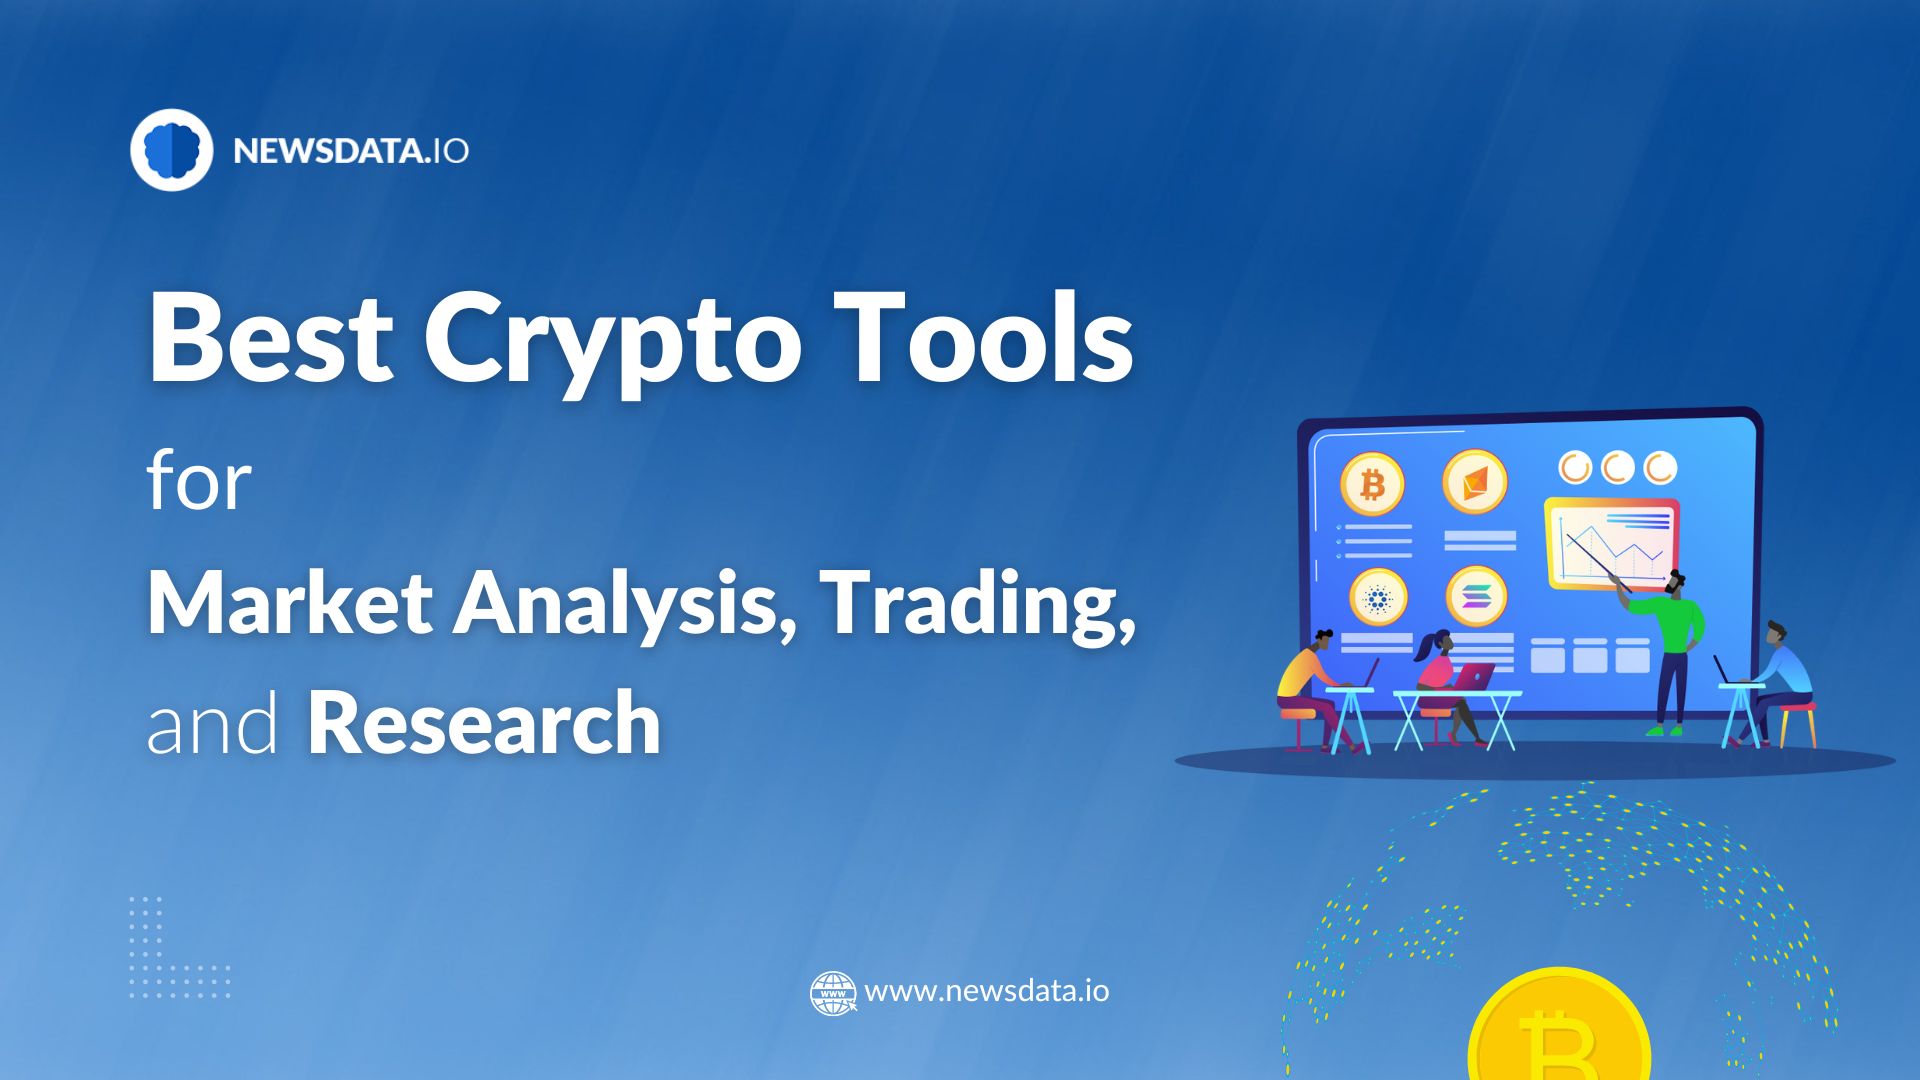 Best Crypto Tools for Market Analysis, Trading, and Research